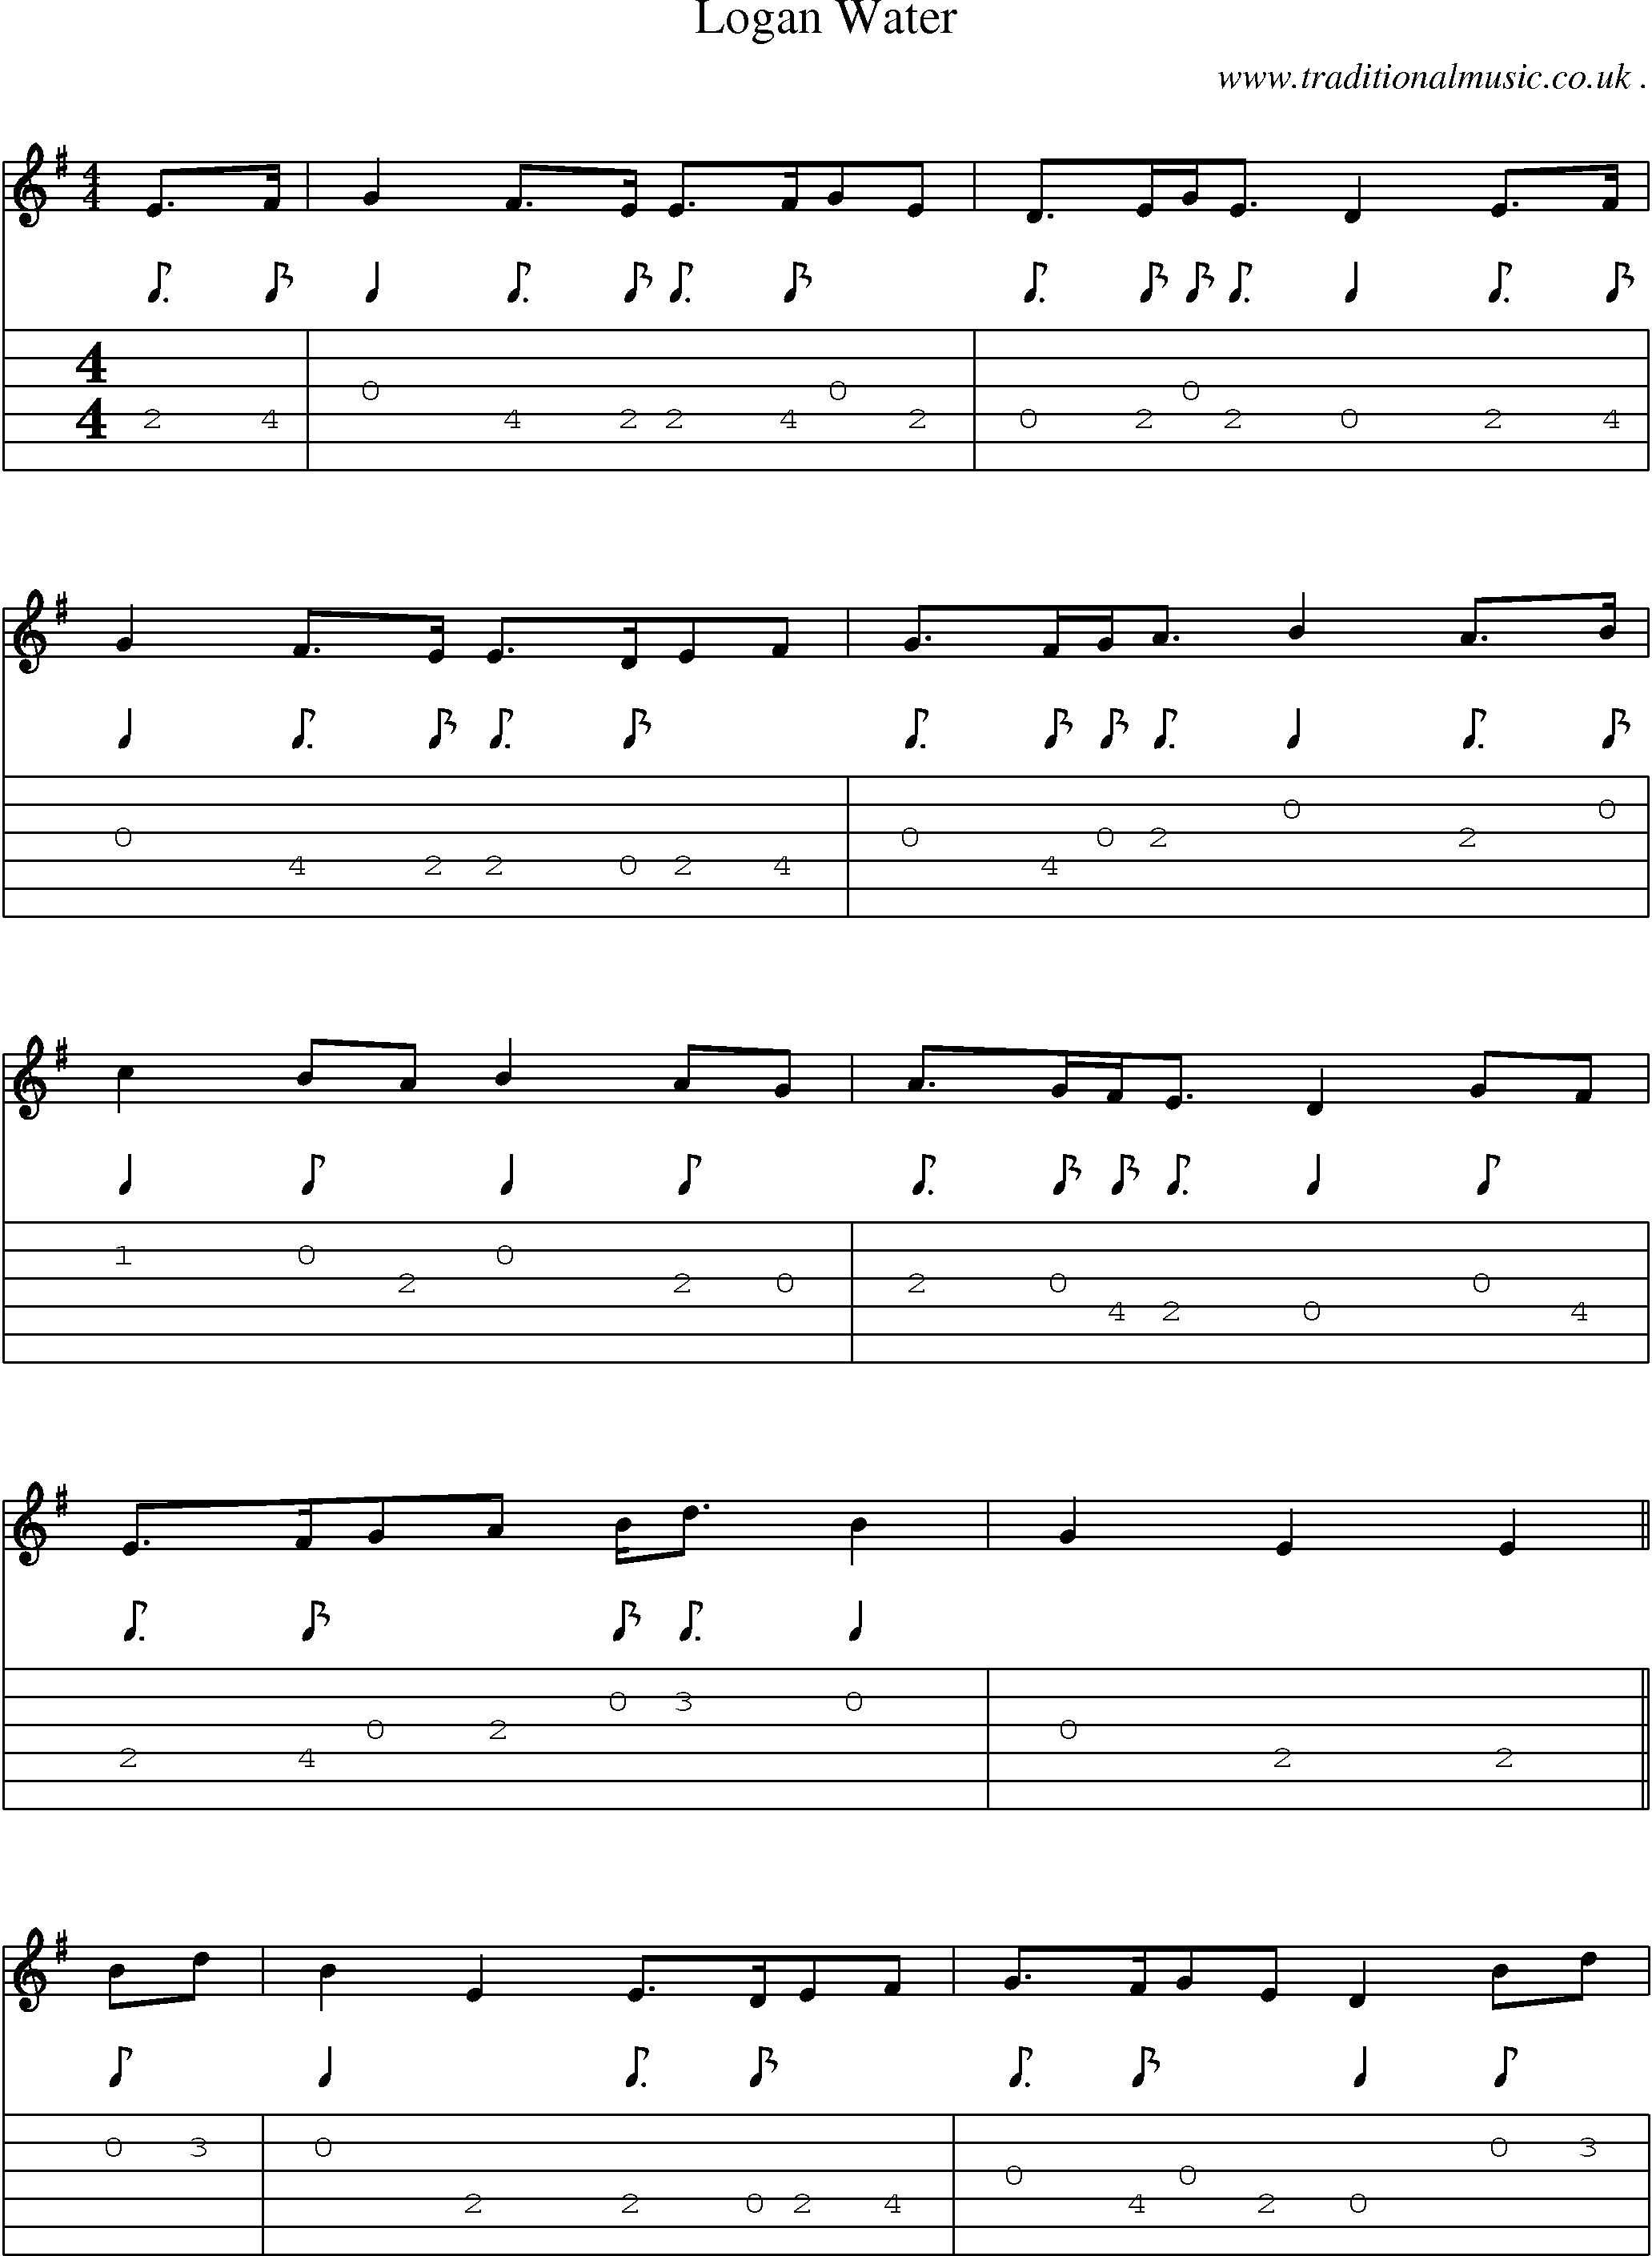 Sheet-music  score, Chords and Guitar Tabs for Logan Water